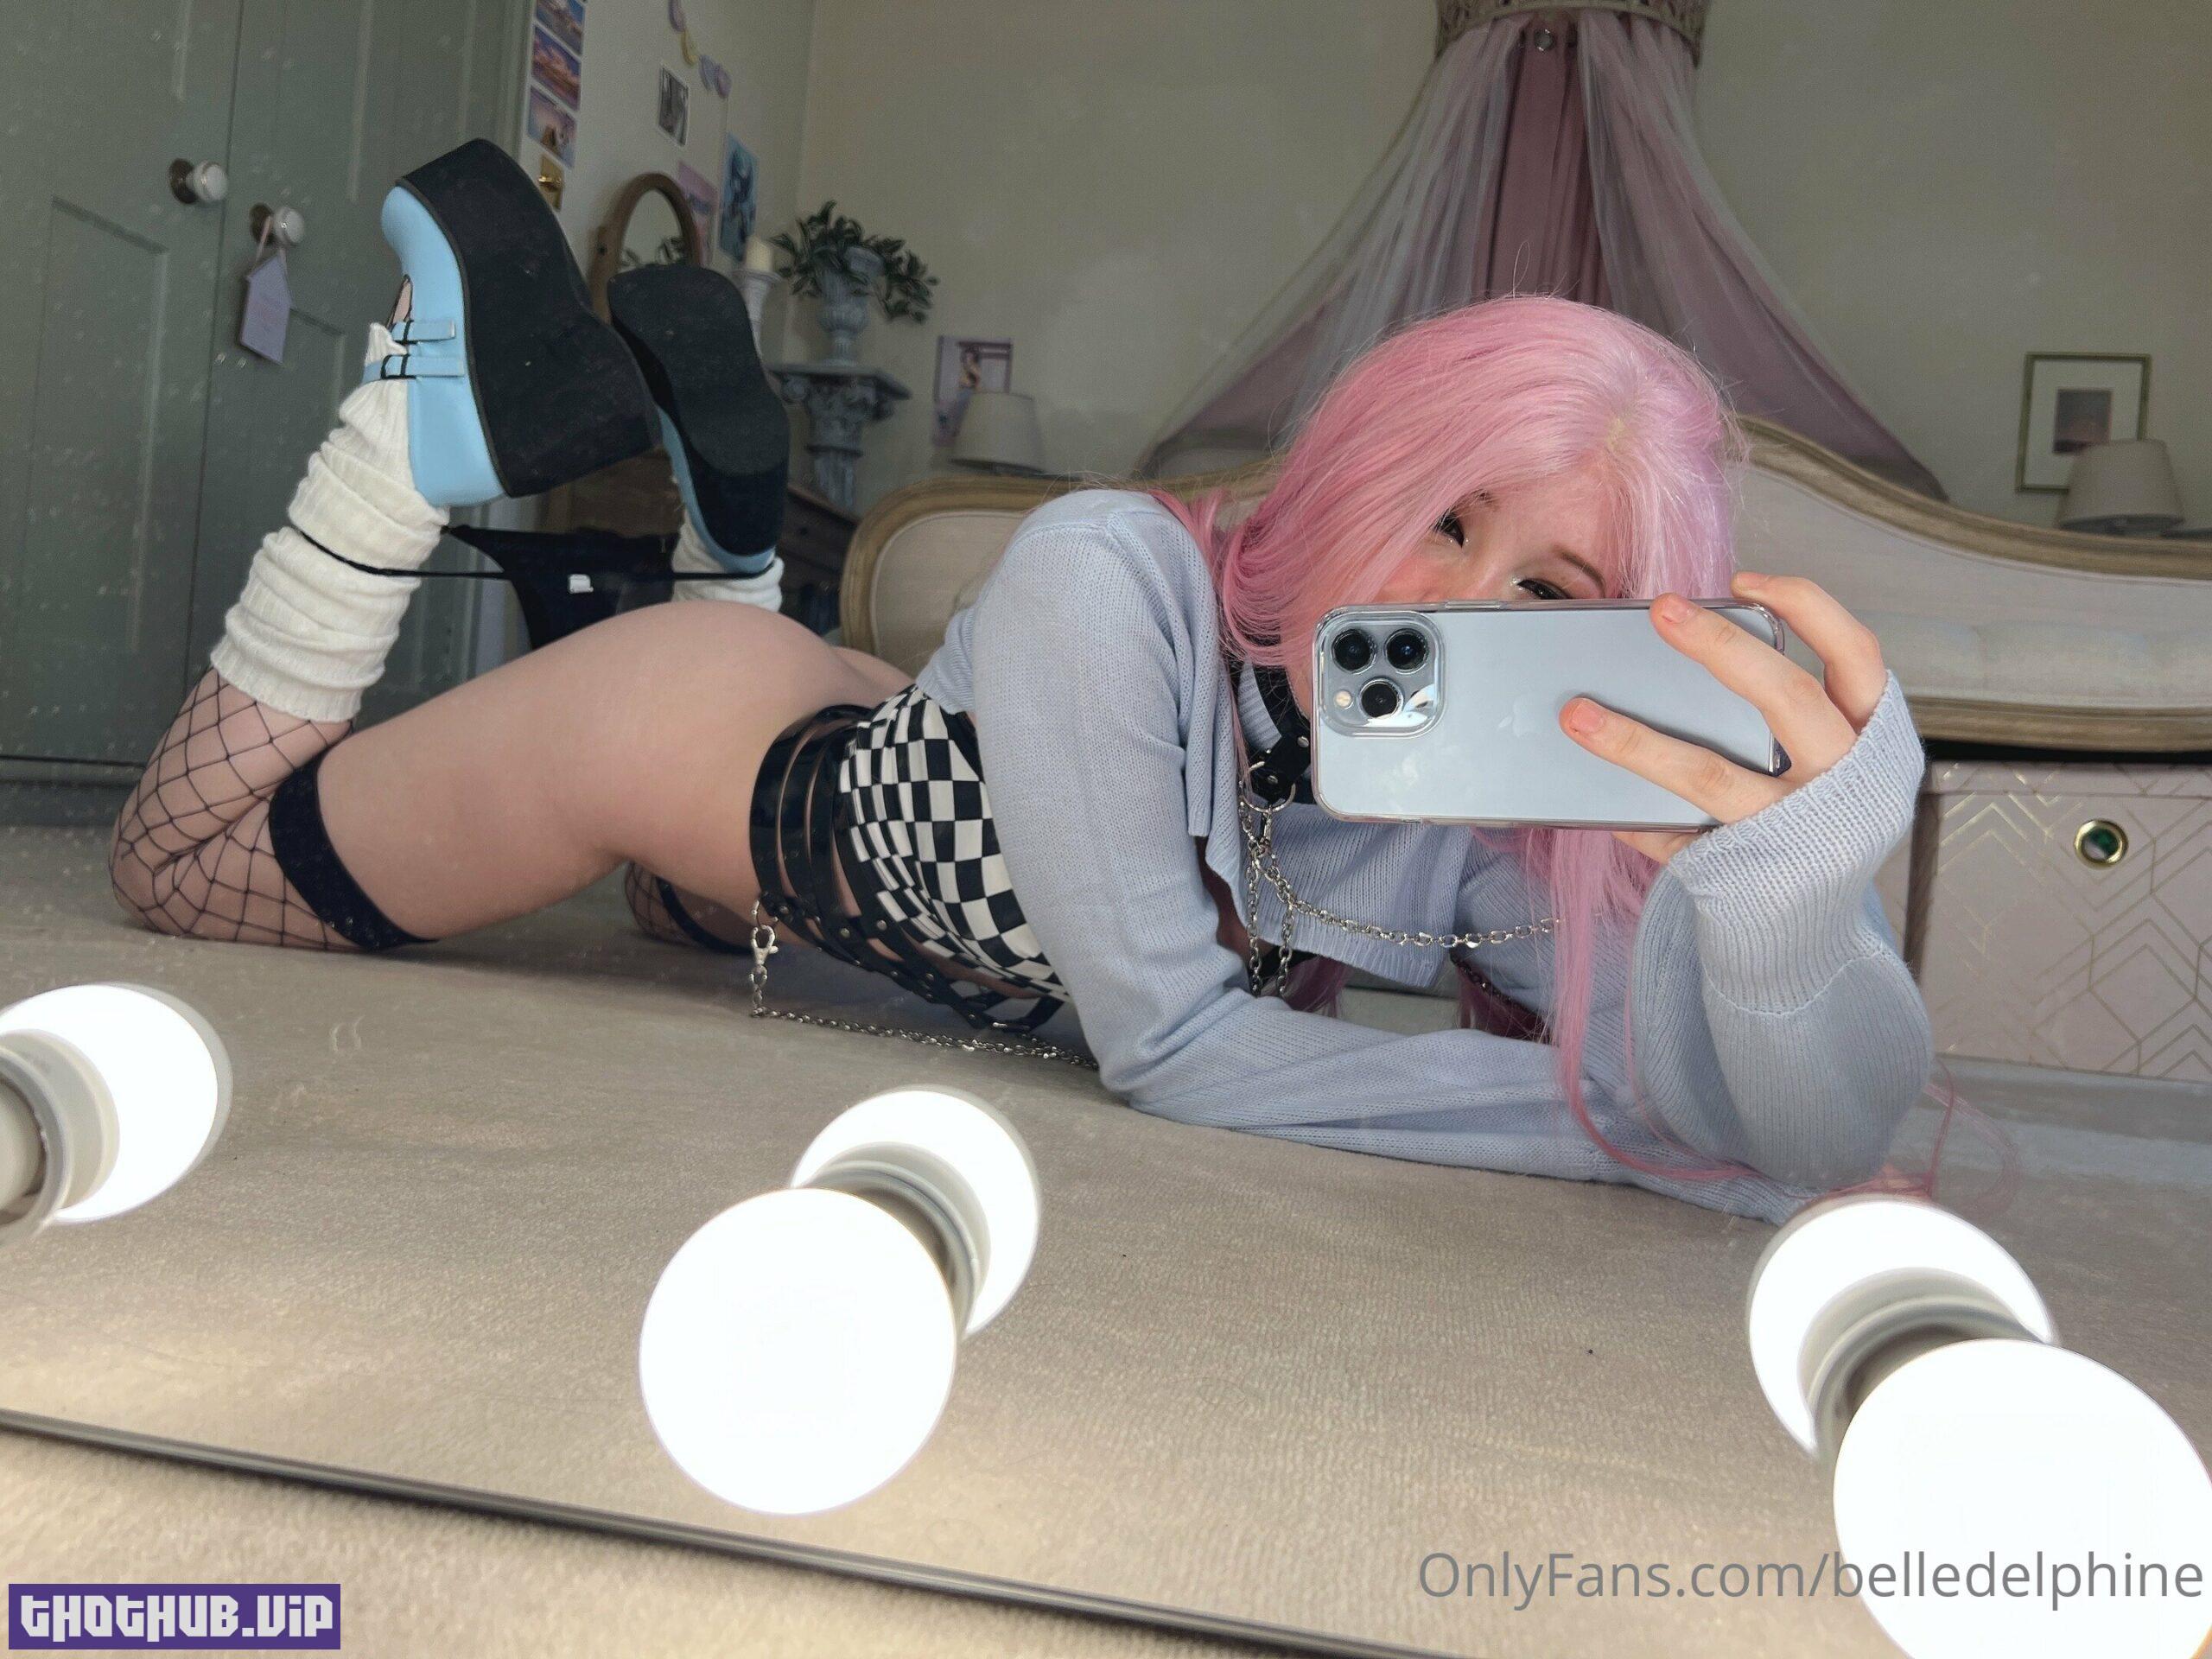 1667578862 182 Top Naked Belle Delphine Nude Cafe Cosplay Porn 2022